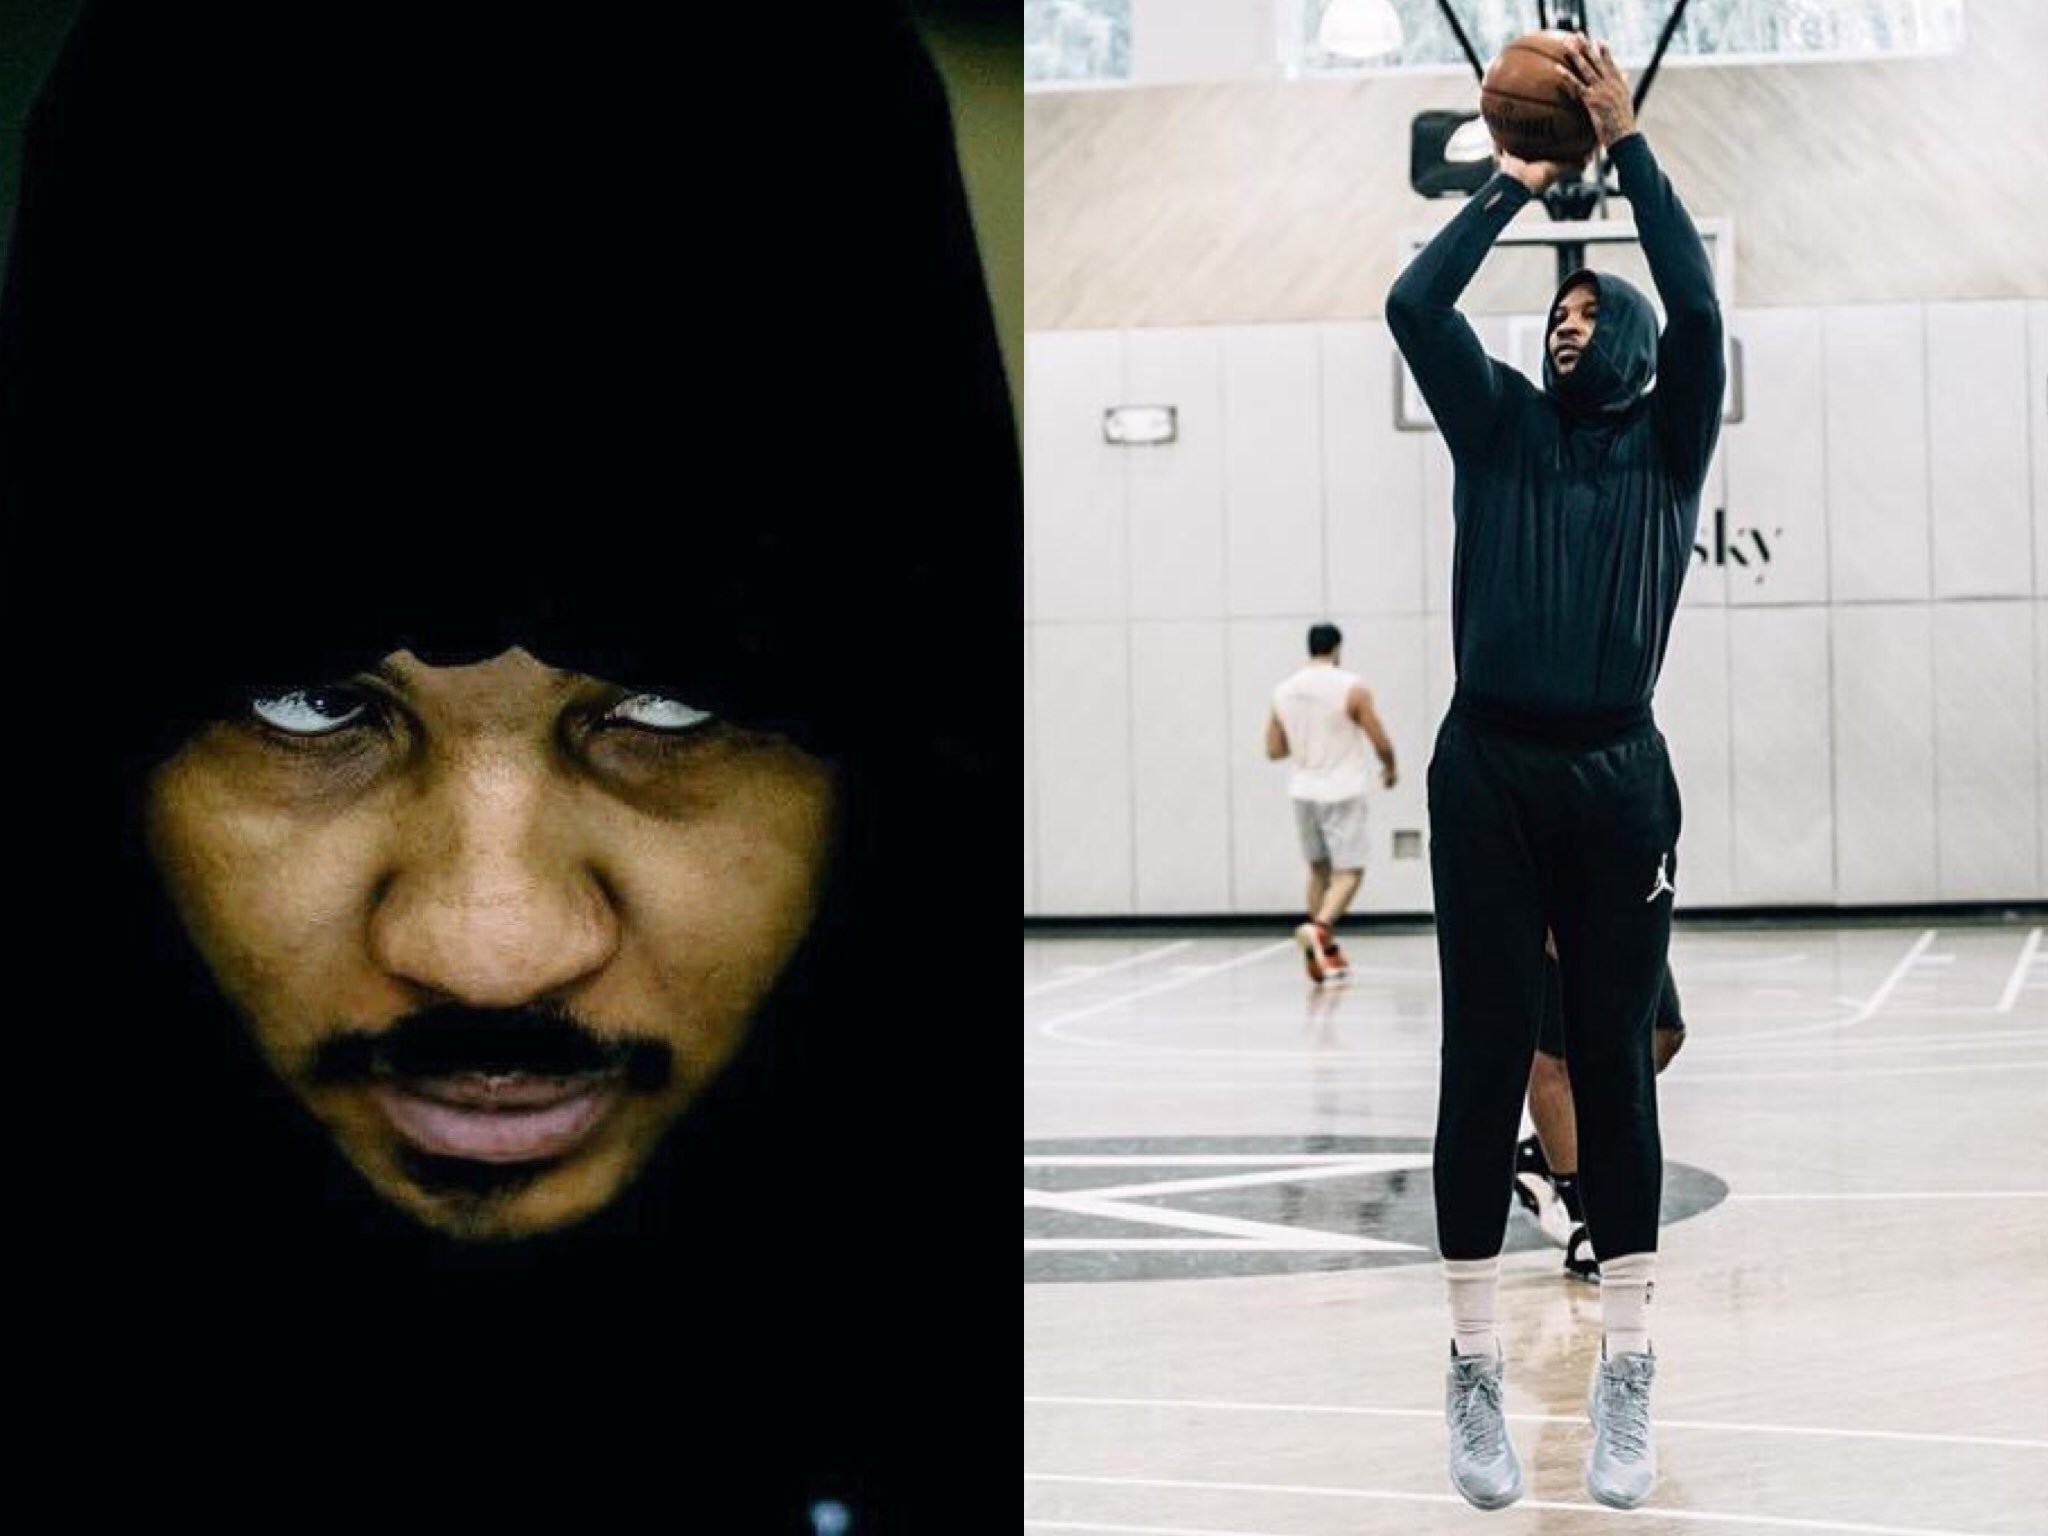 2048x1536 HOODIE MELO: WHY PLAY DEFENSE WHEN I CAN GET TO 100 BEFORE THE OTHER TEAM